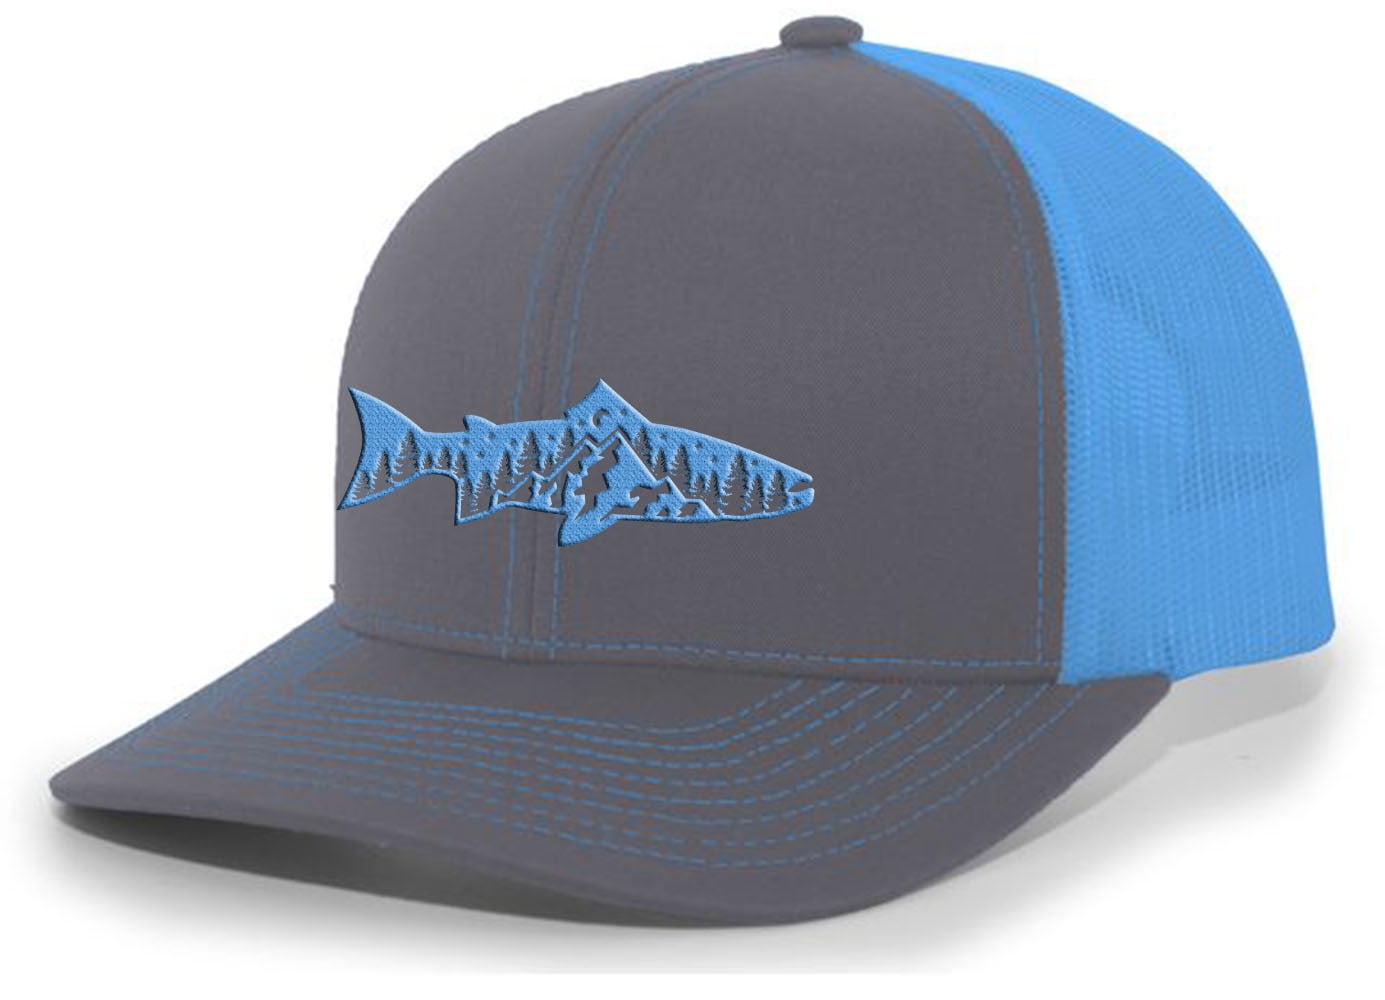 Men's Outdoors Fishing Trout Scenic Forest Woodland Embroidered Mesh Back Trucker  Hat, Charcoal/Neon Blue 